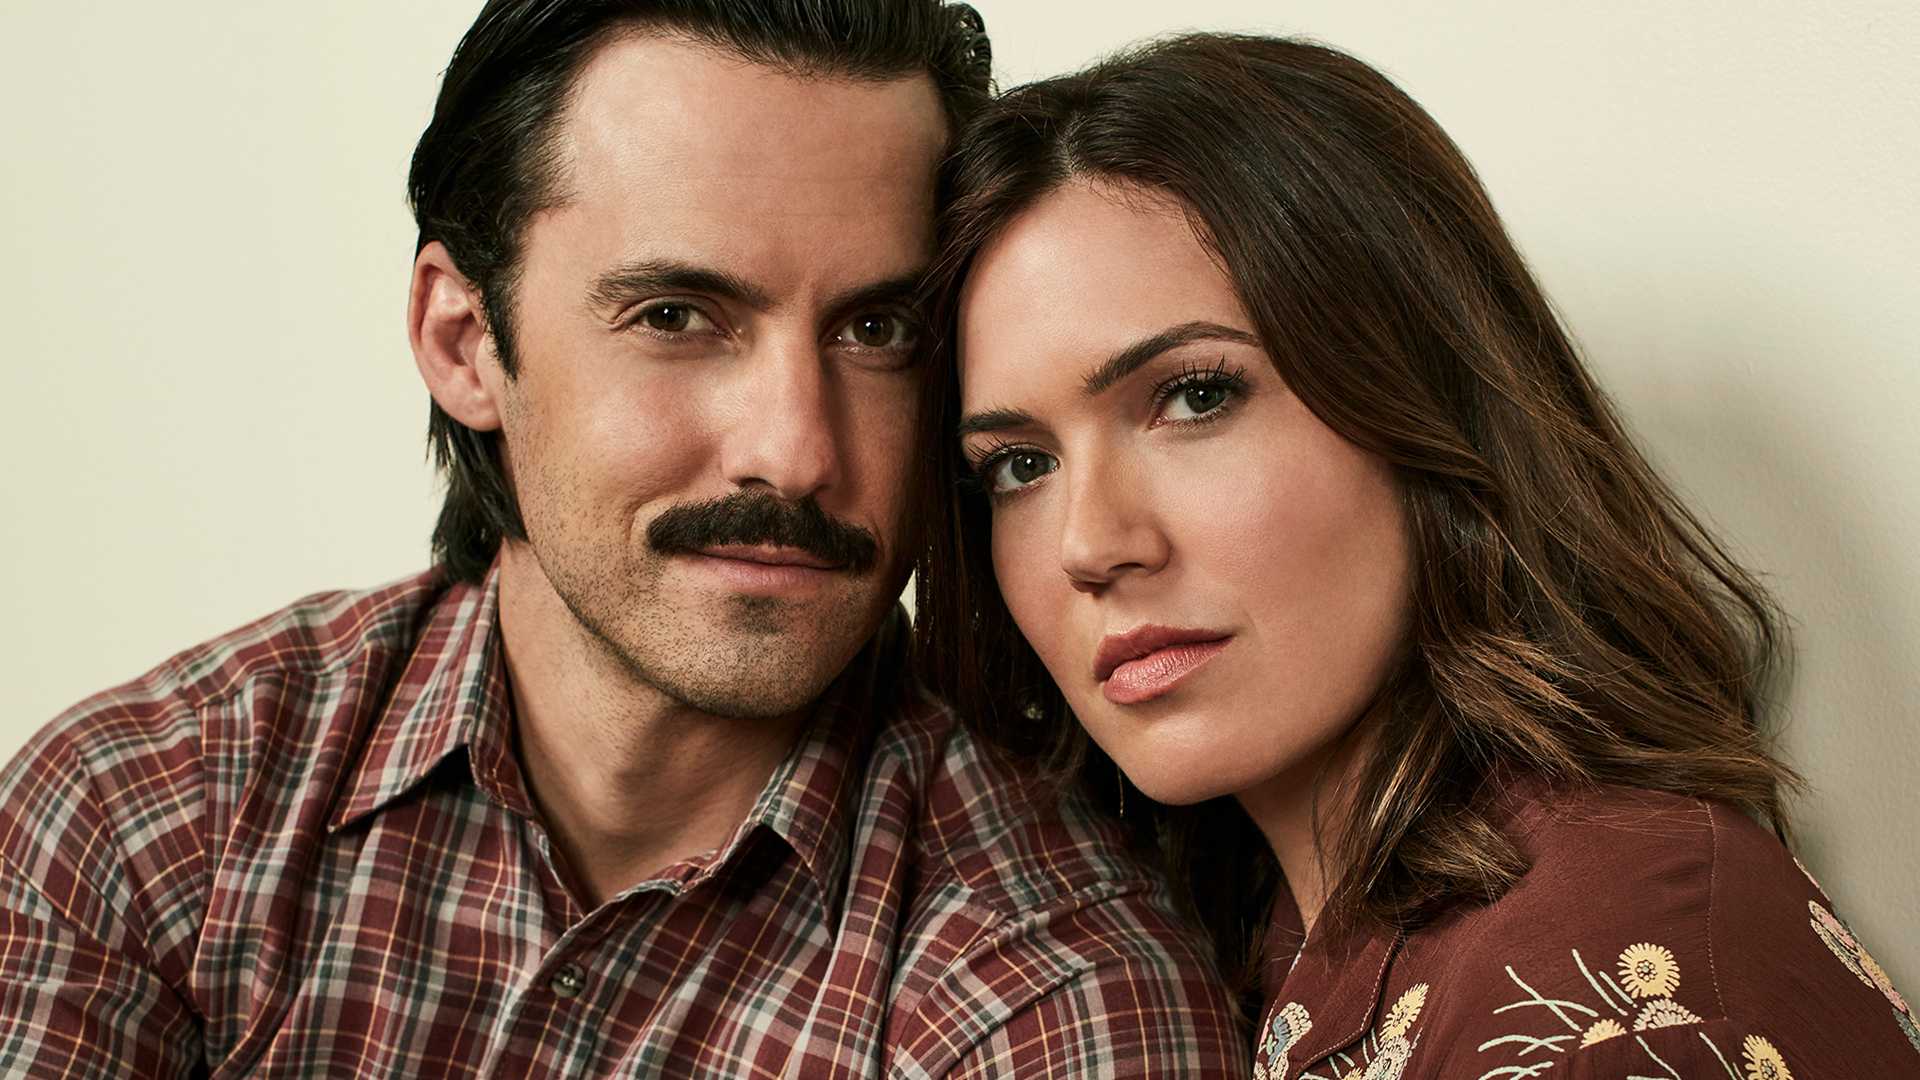 Headshot of Milo Ventimiglia as Jack Pearson and Mandy Moore as Rebecca Pearson in ‘This Is Us’